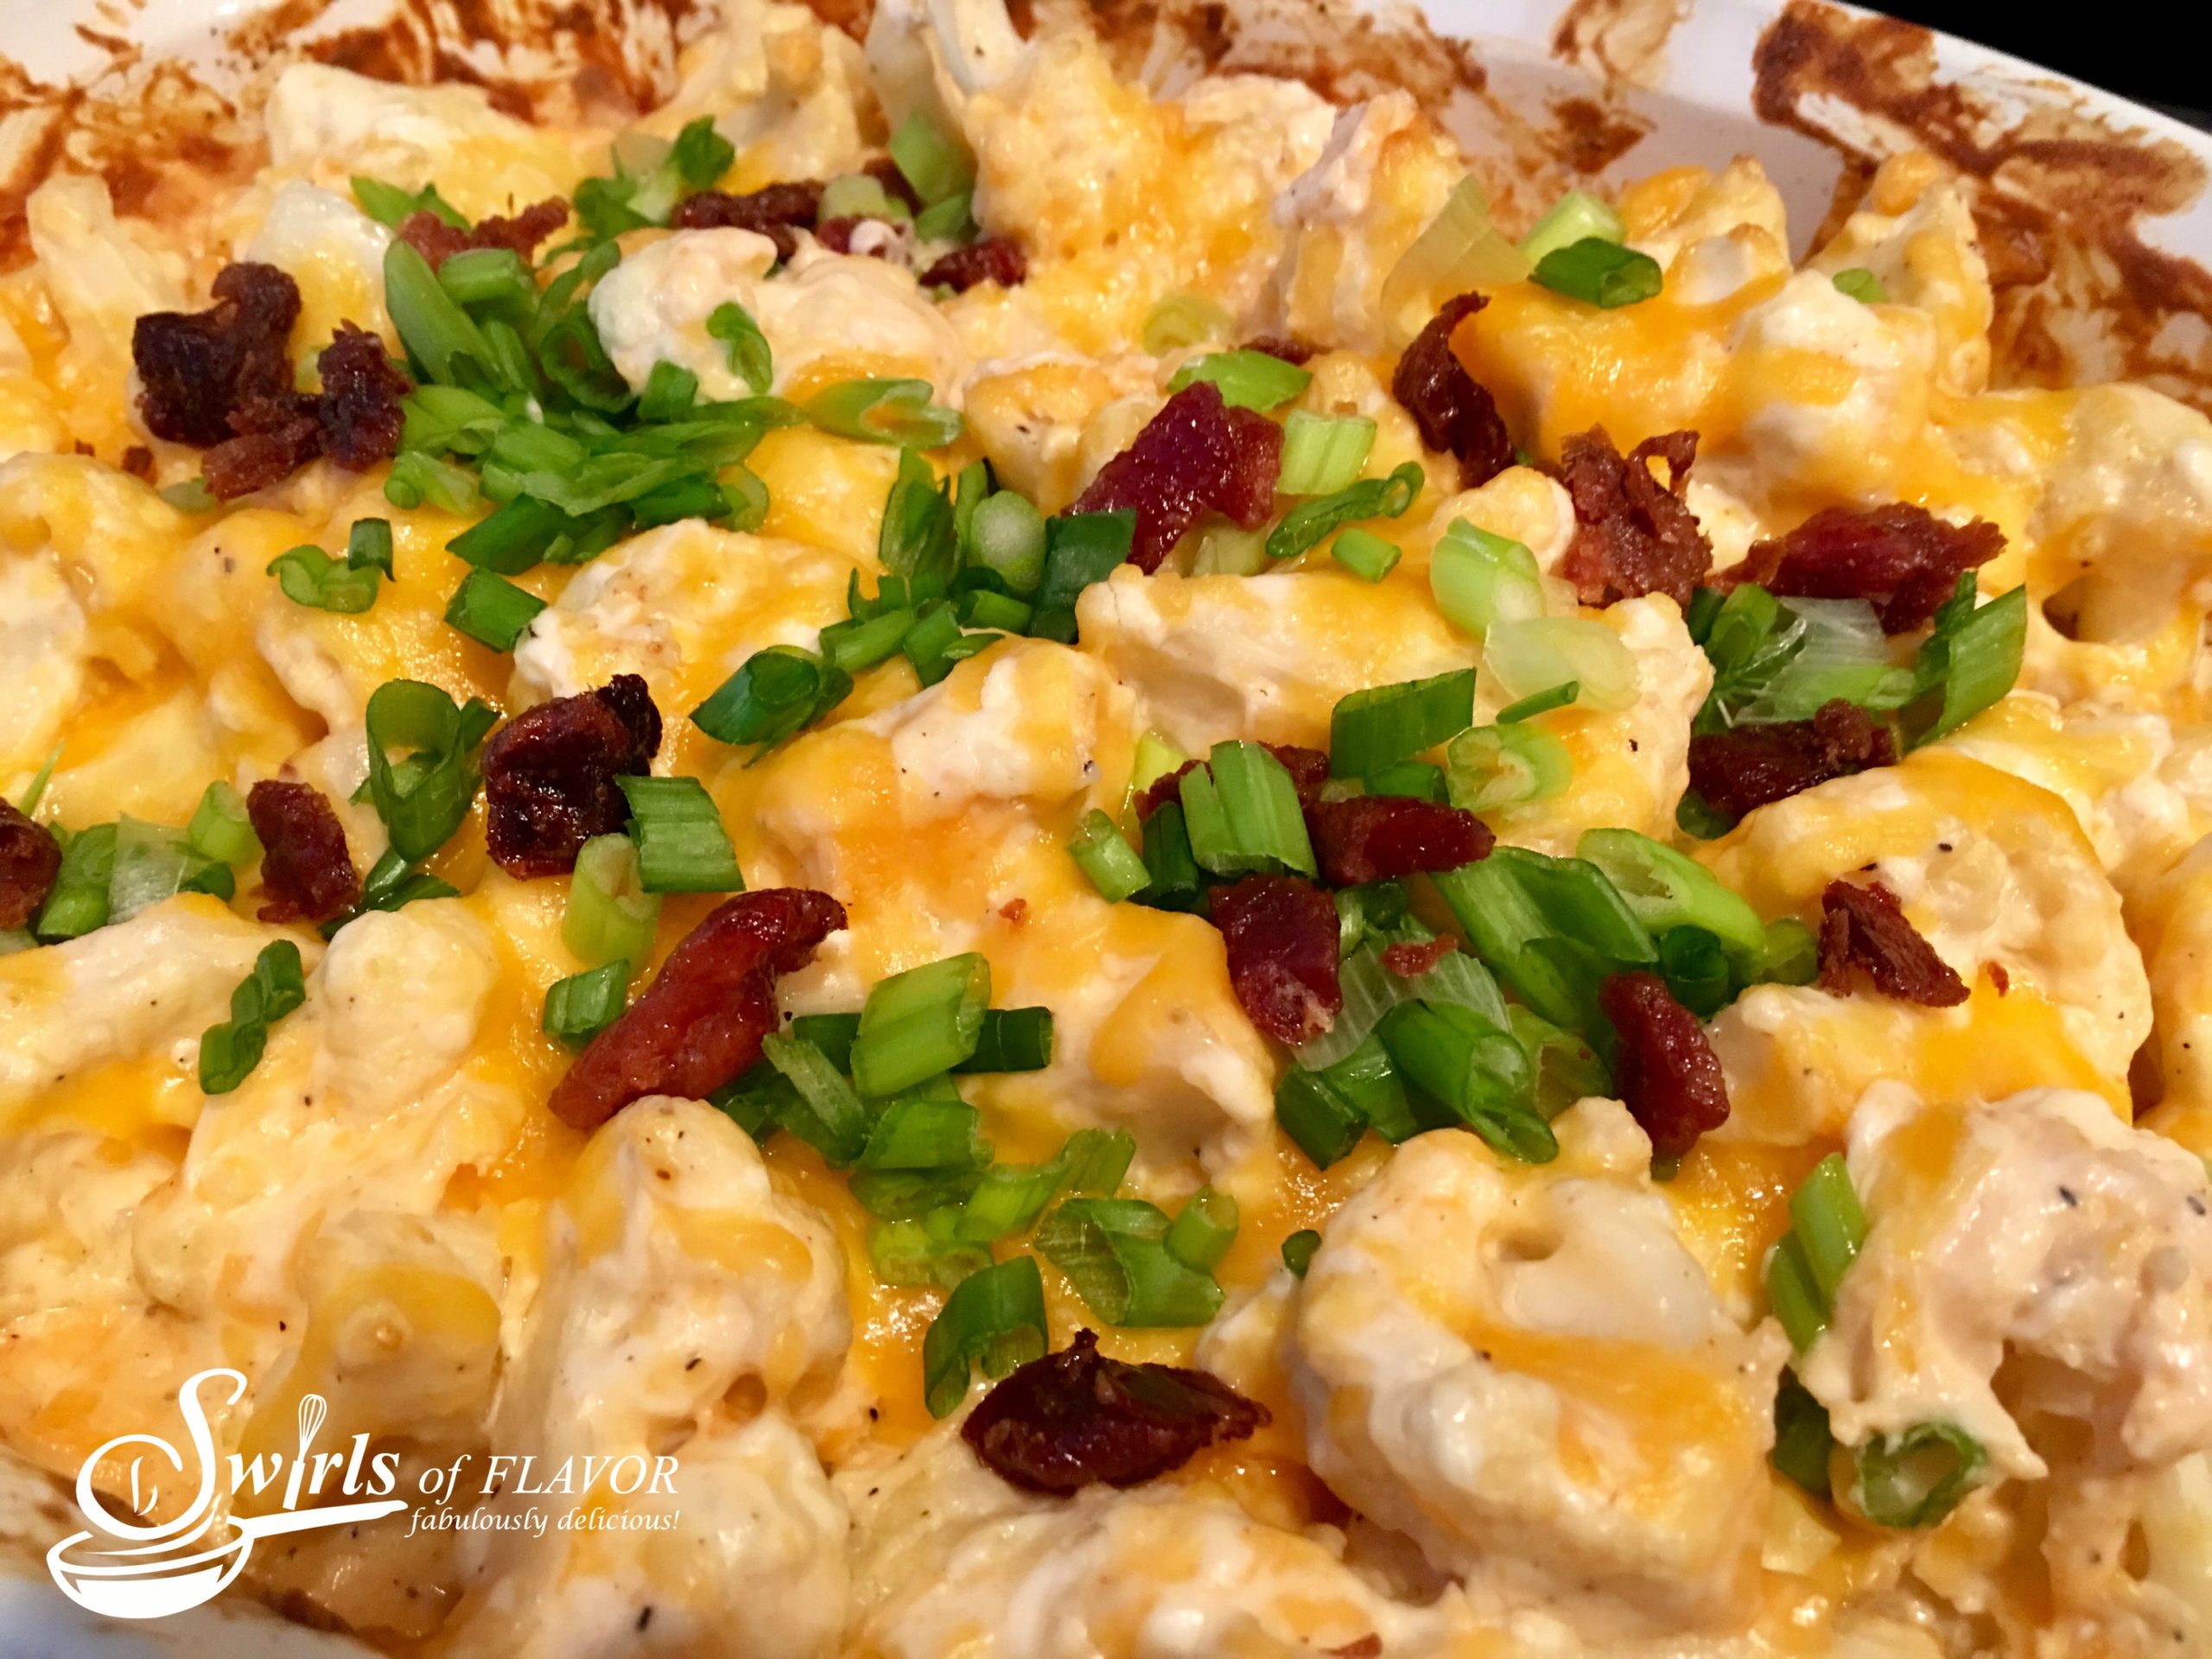 Oven-roasted cauliflower is cooked to perfection with cheese and turkey bacon